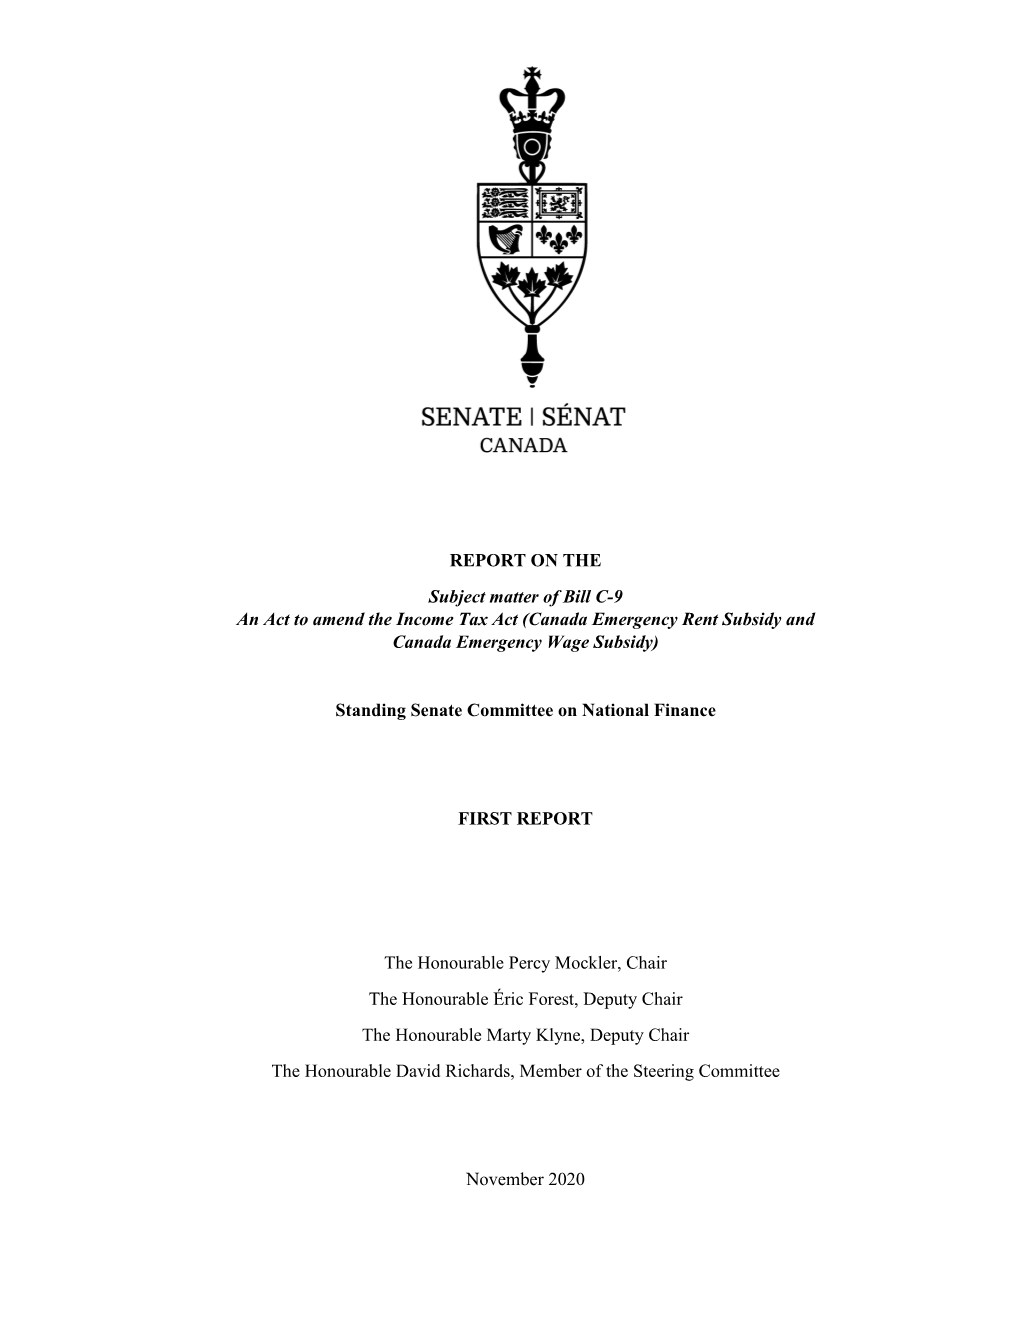 REPORT on the Subject Matter of Bill C-9 an Act to Amend the Income Tax Act (Canada Emergency Rent Subsidy and Canada Emergency Wage Subsidy)